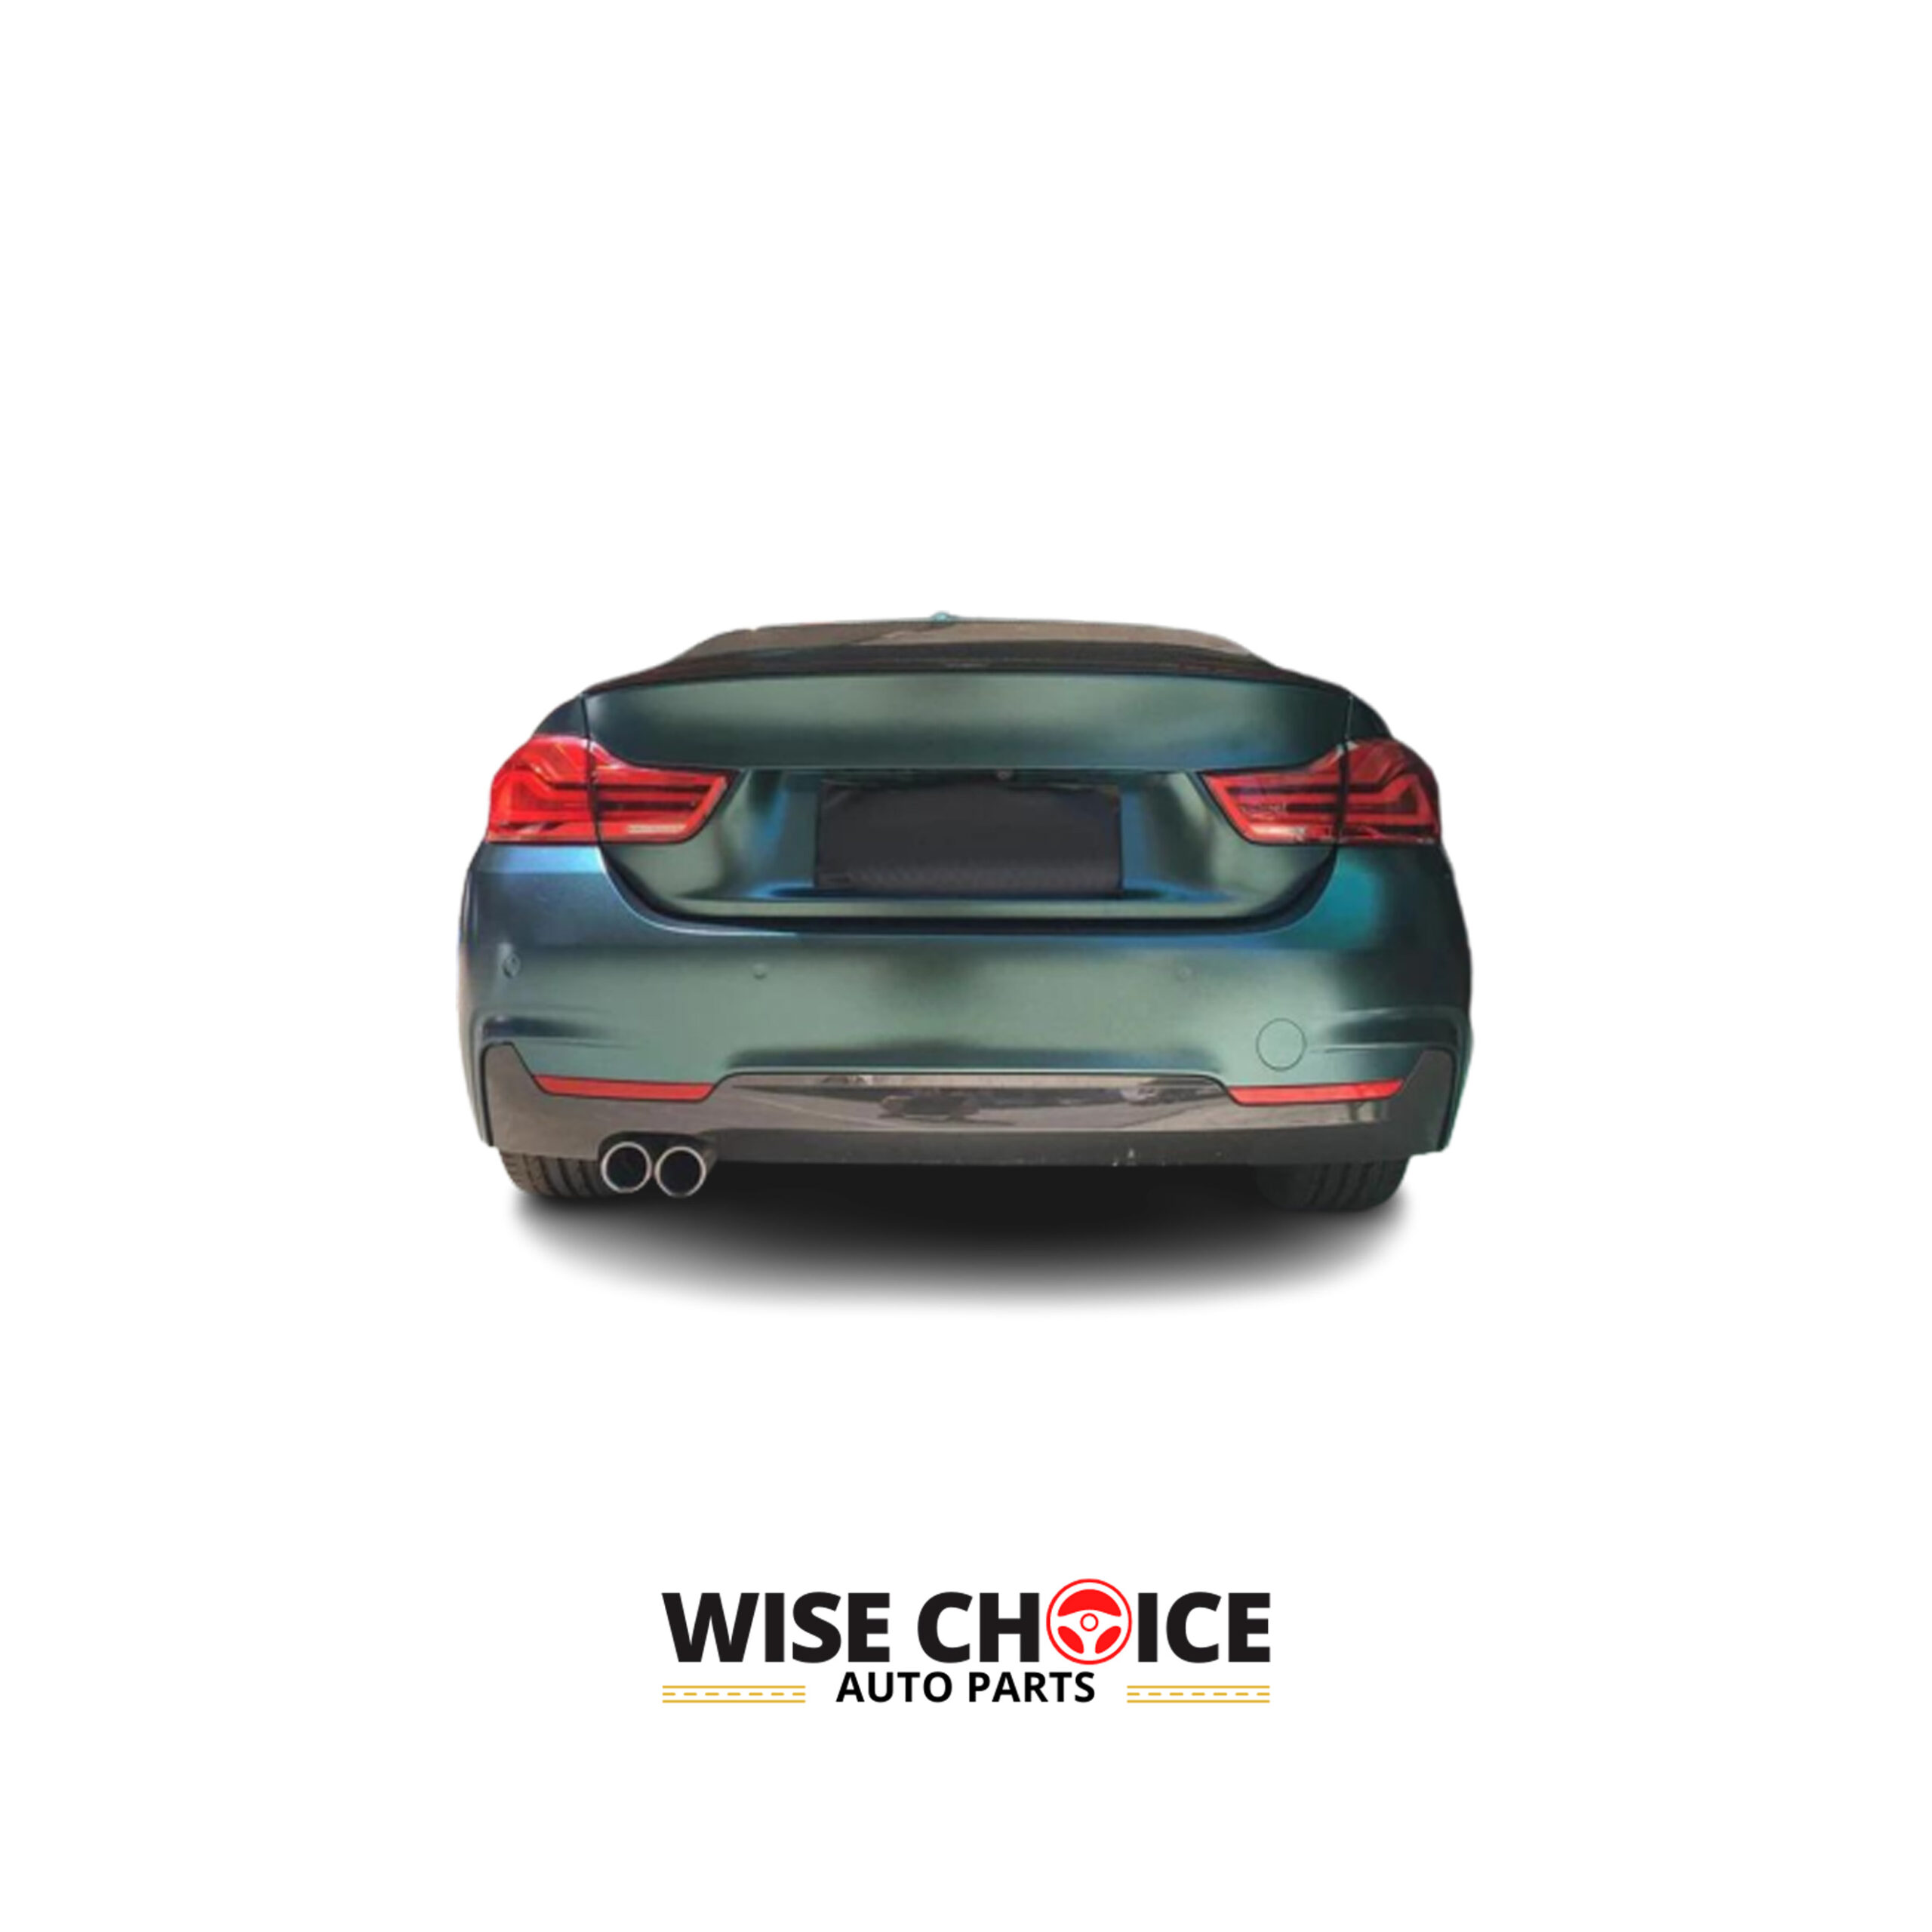 2014-2018 F32 BMW 4 Series with mounted Carbon Fiber Rear Trunk Spoiler